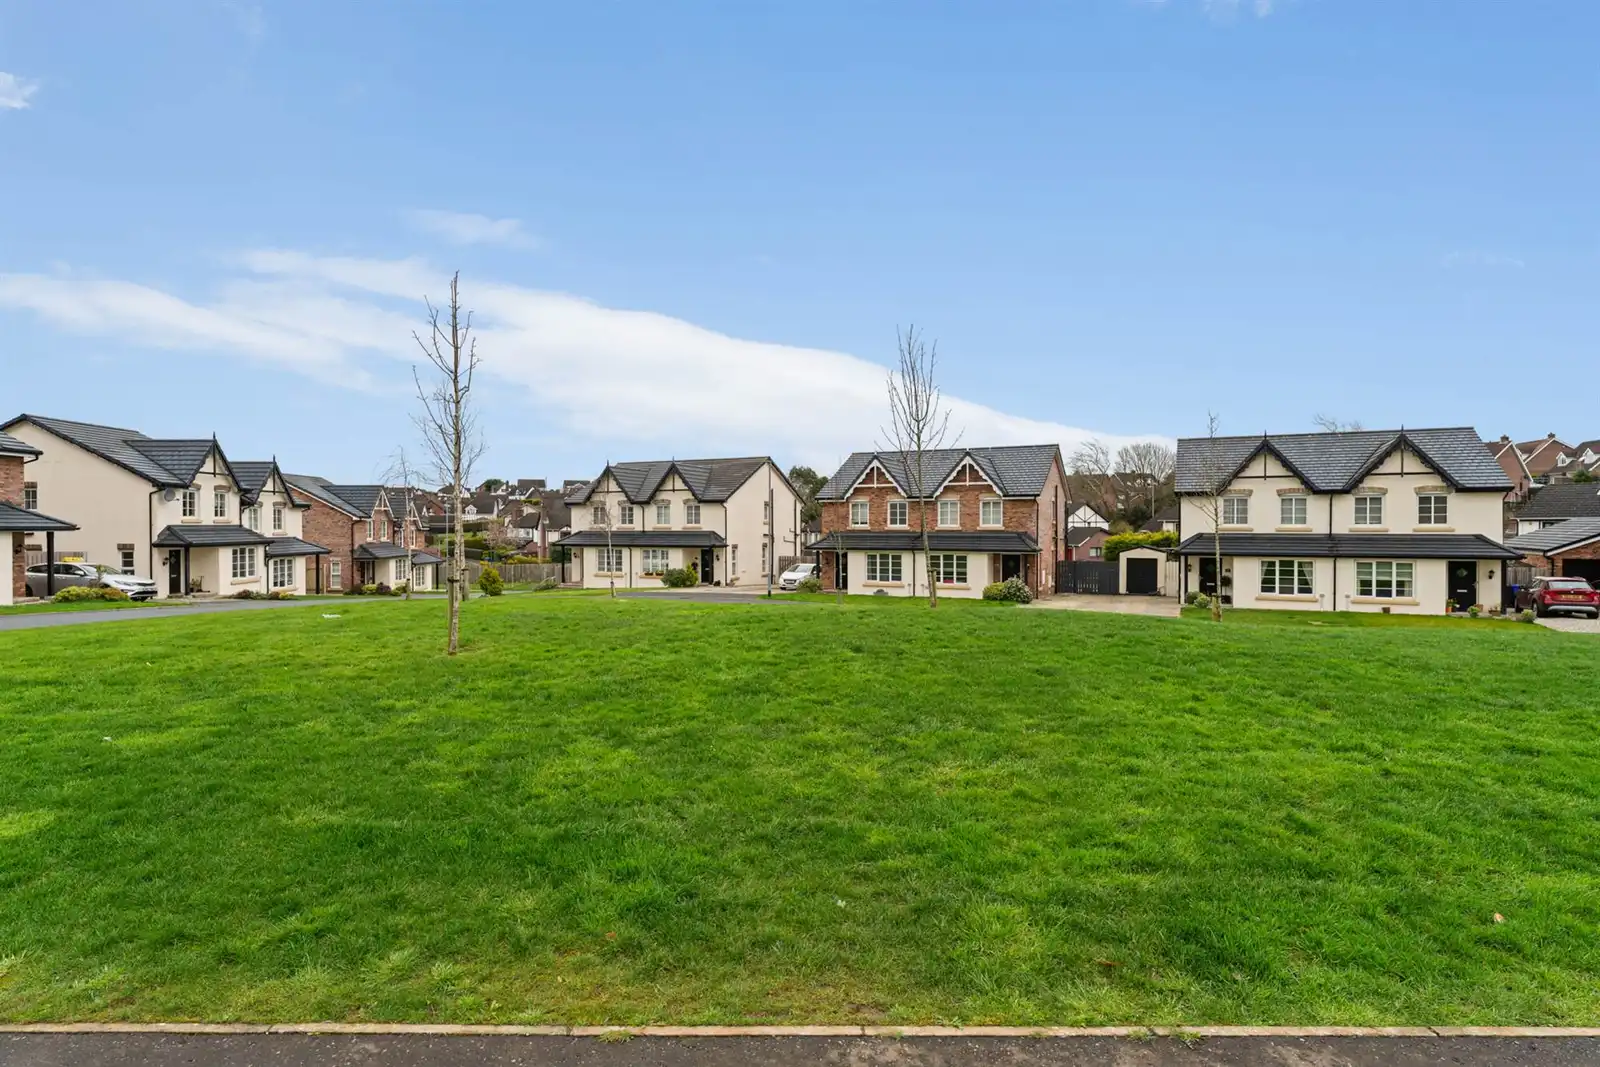 20 Lily Wood Lane, Newtownards, County Down